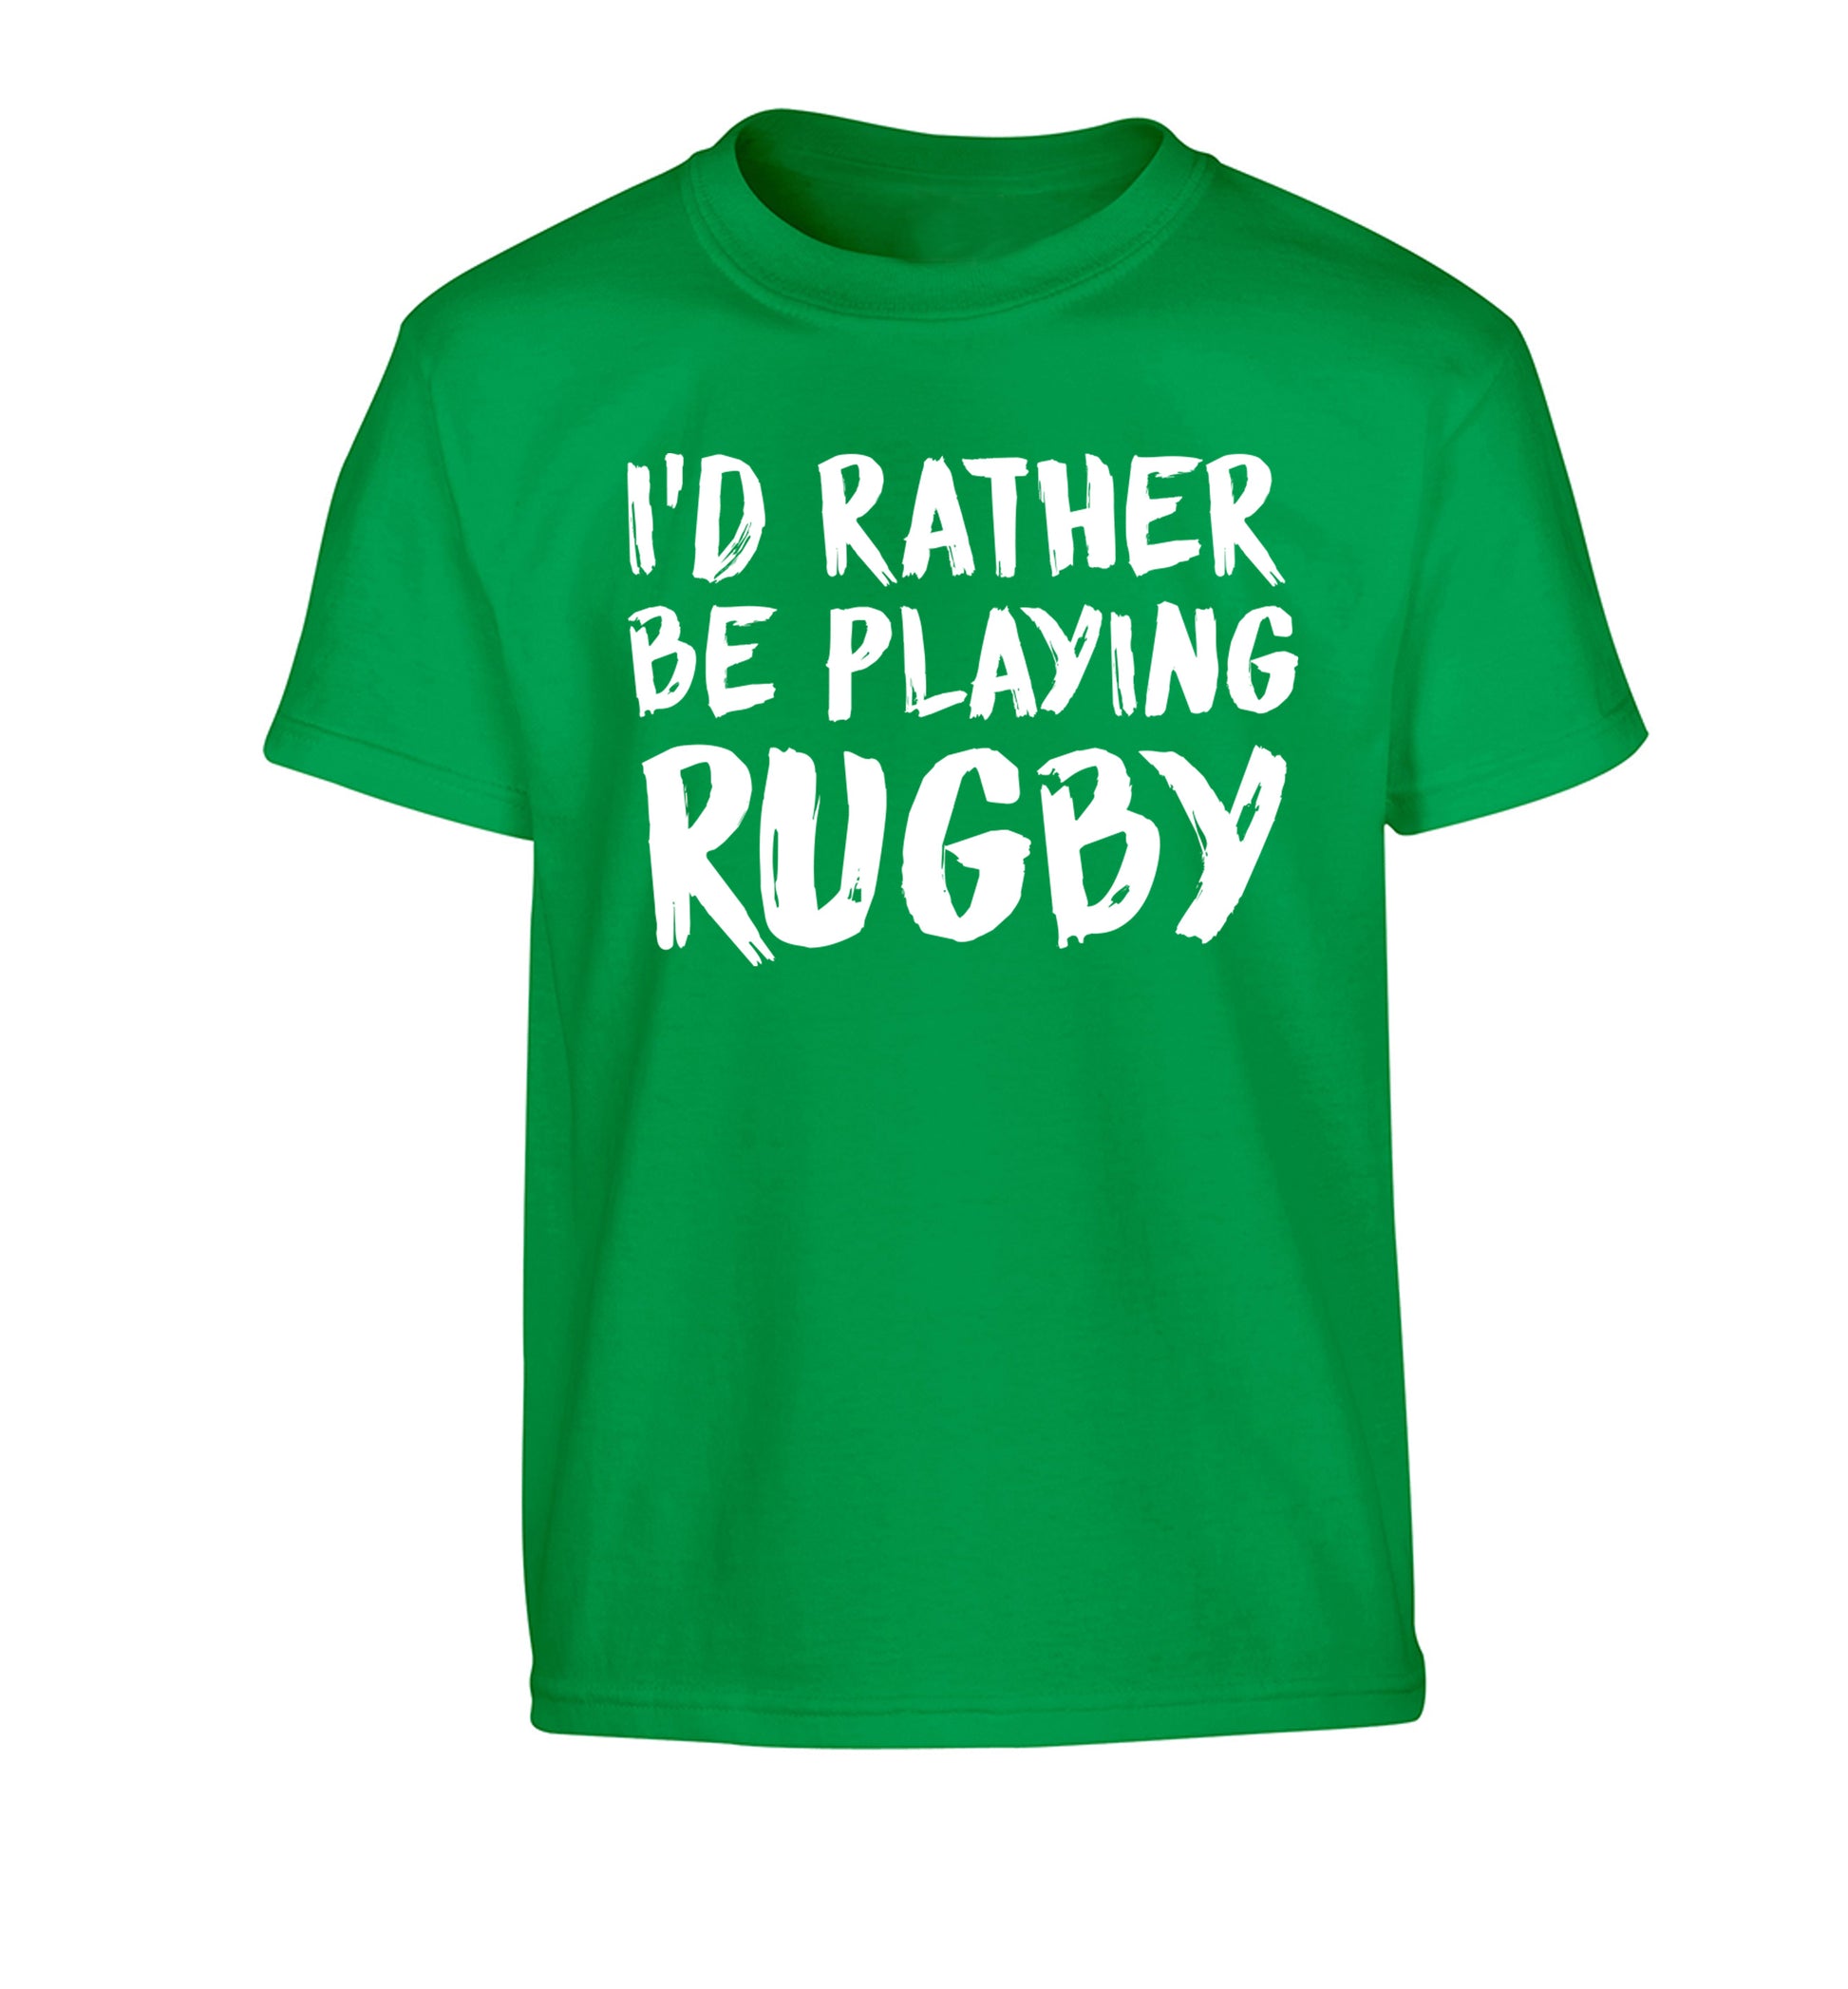 I'd rather be playing rugby Children's green Tshirt 12-13 Years